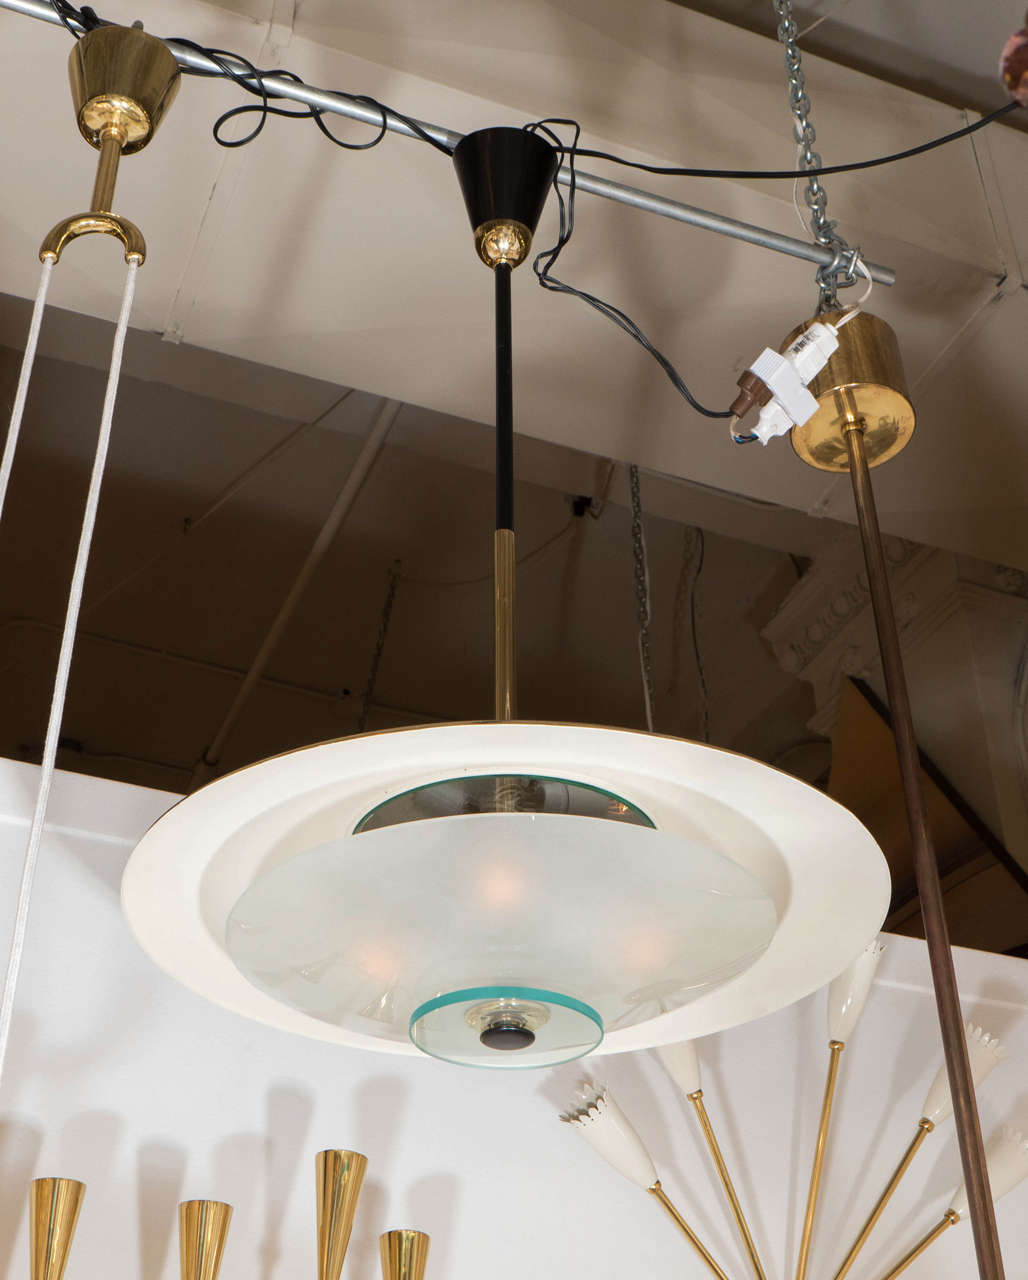 A beautifully made 1950s Italian modern design pendant light in a saucer shape attributed to the famed Italian lighting company Stilnovo. The top dish of the lamp is polished brass while the underneath is white enamel to allow the light to reflect.